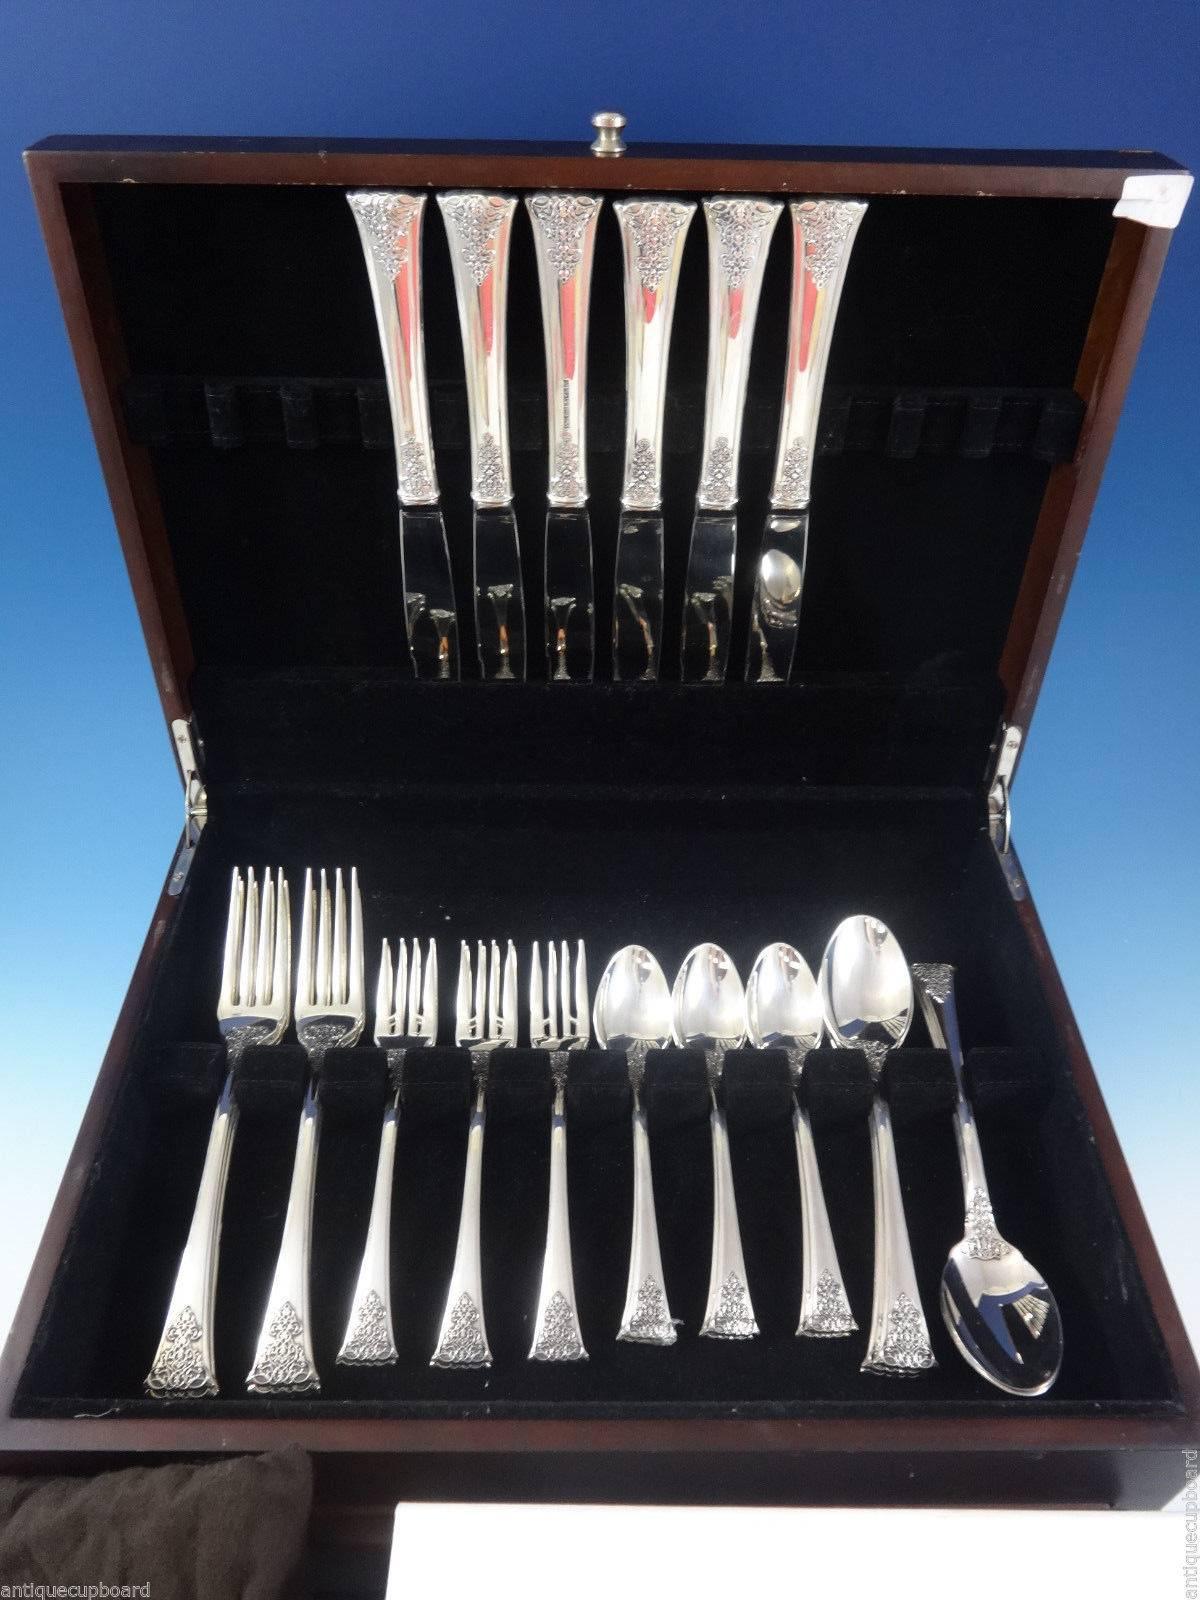 For sublime sophistication, serve your guests with Vera Wang's Imperial Scroll sterling silver flatware. A scroll design reminiscent of a regal crest. The pieces are wonderfully large and heavy.

Imperial Scroll by Vera Wang sterling silver